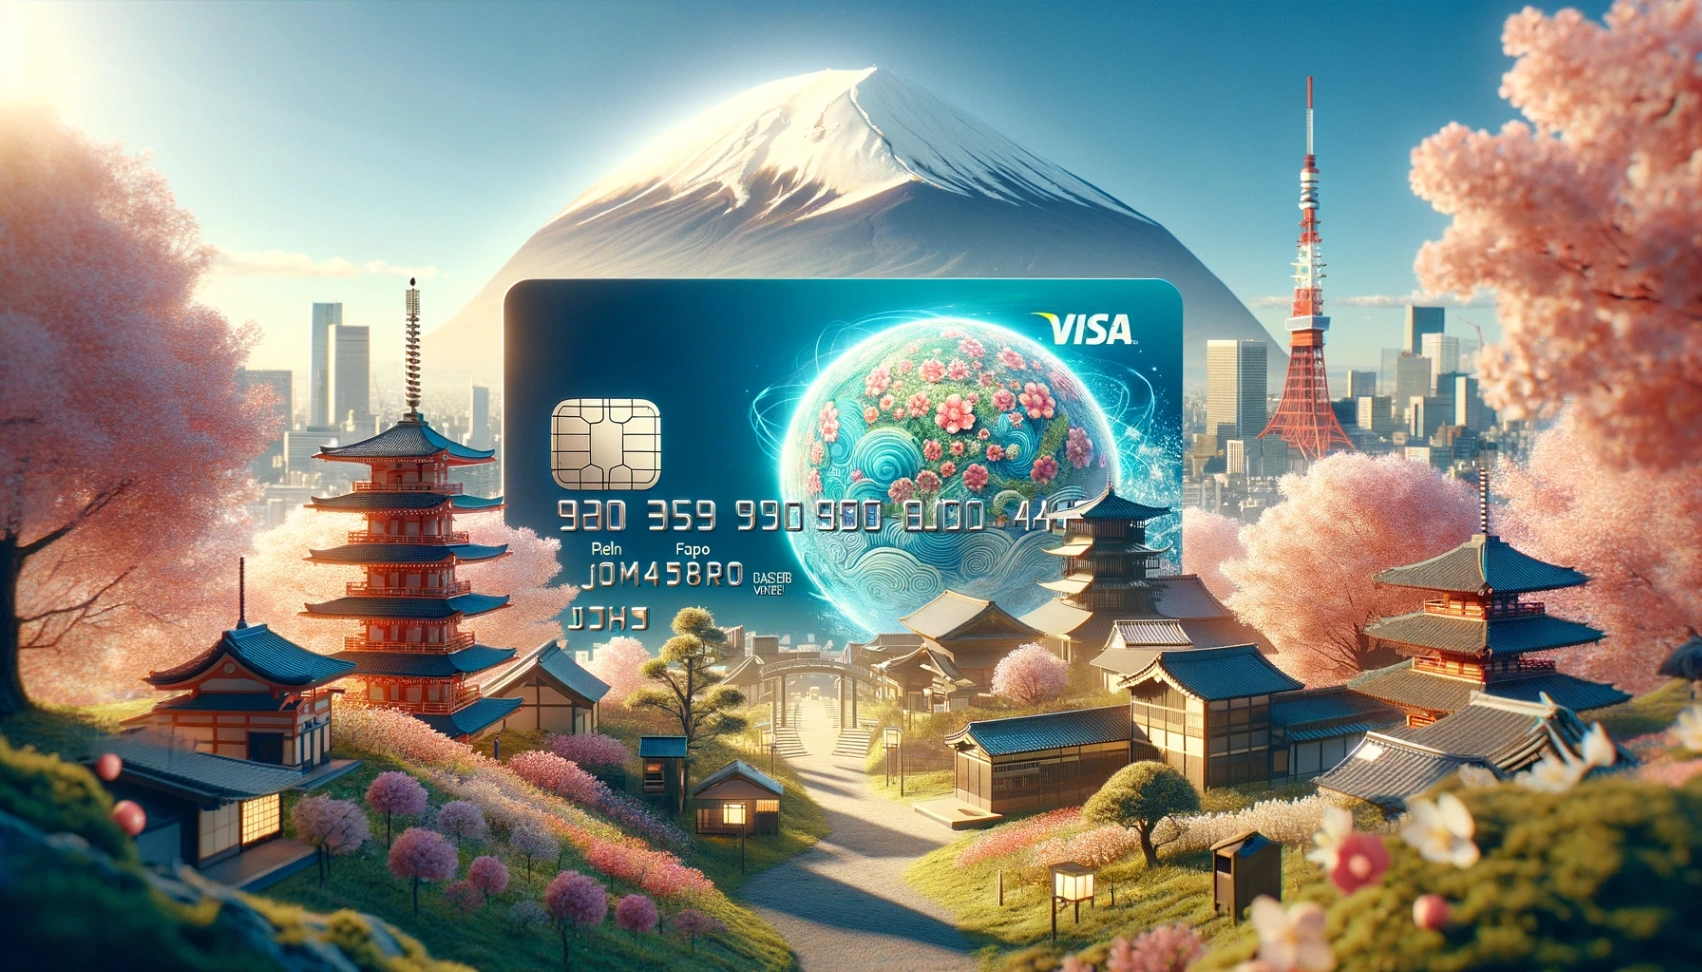 Japan Post Visa Credit Card - Learn the Benefits and How to Apply